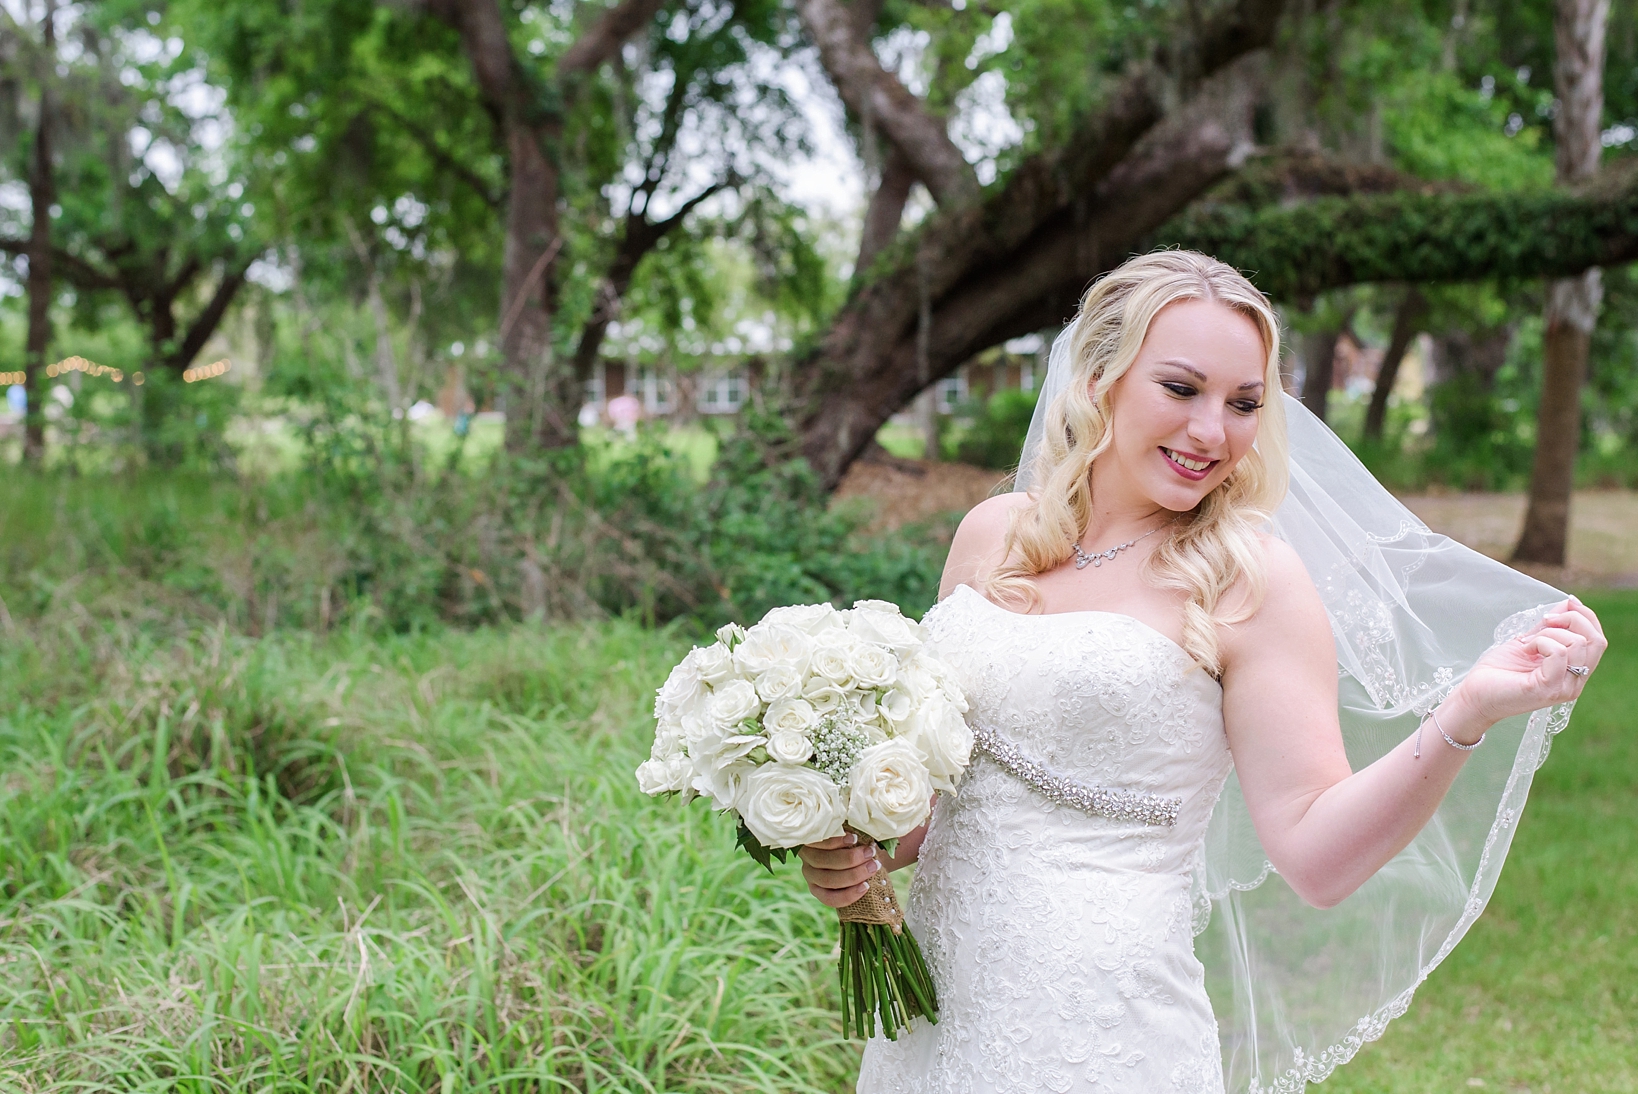 Bride holding her veil and white rose bouquet in Tampa, FL